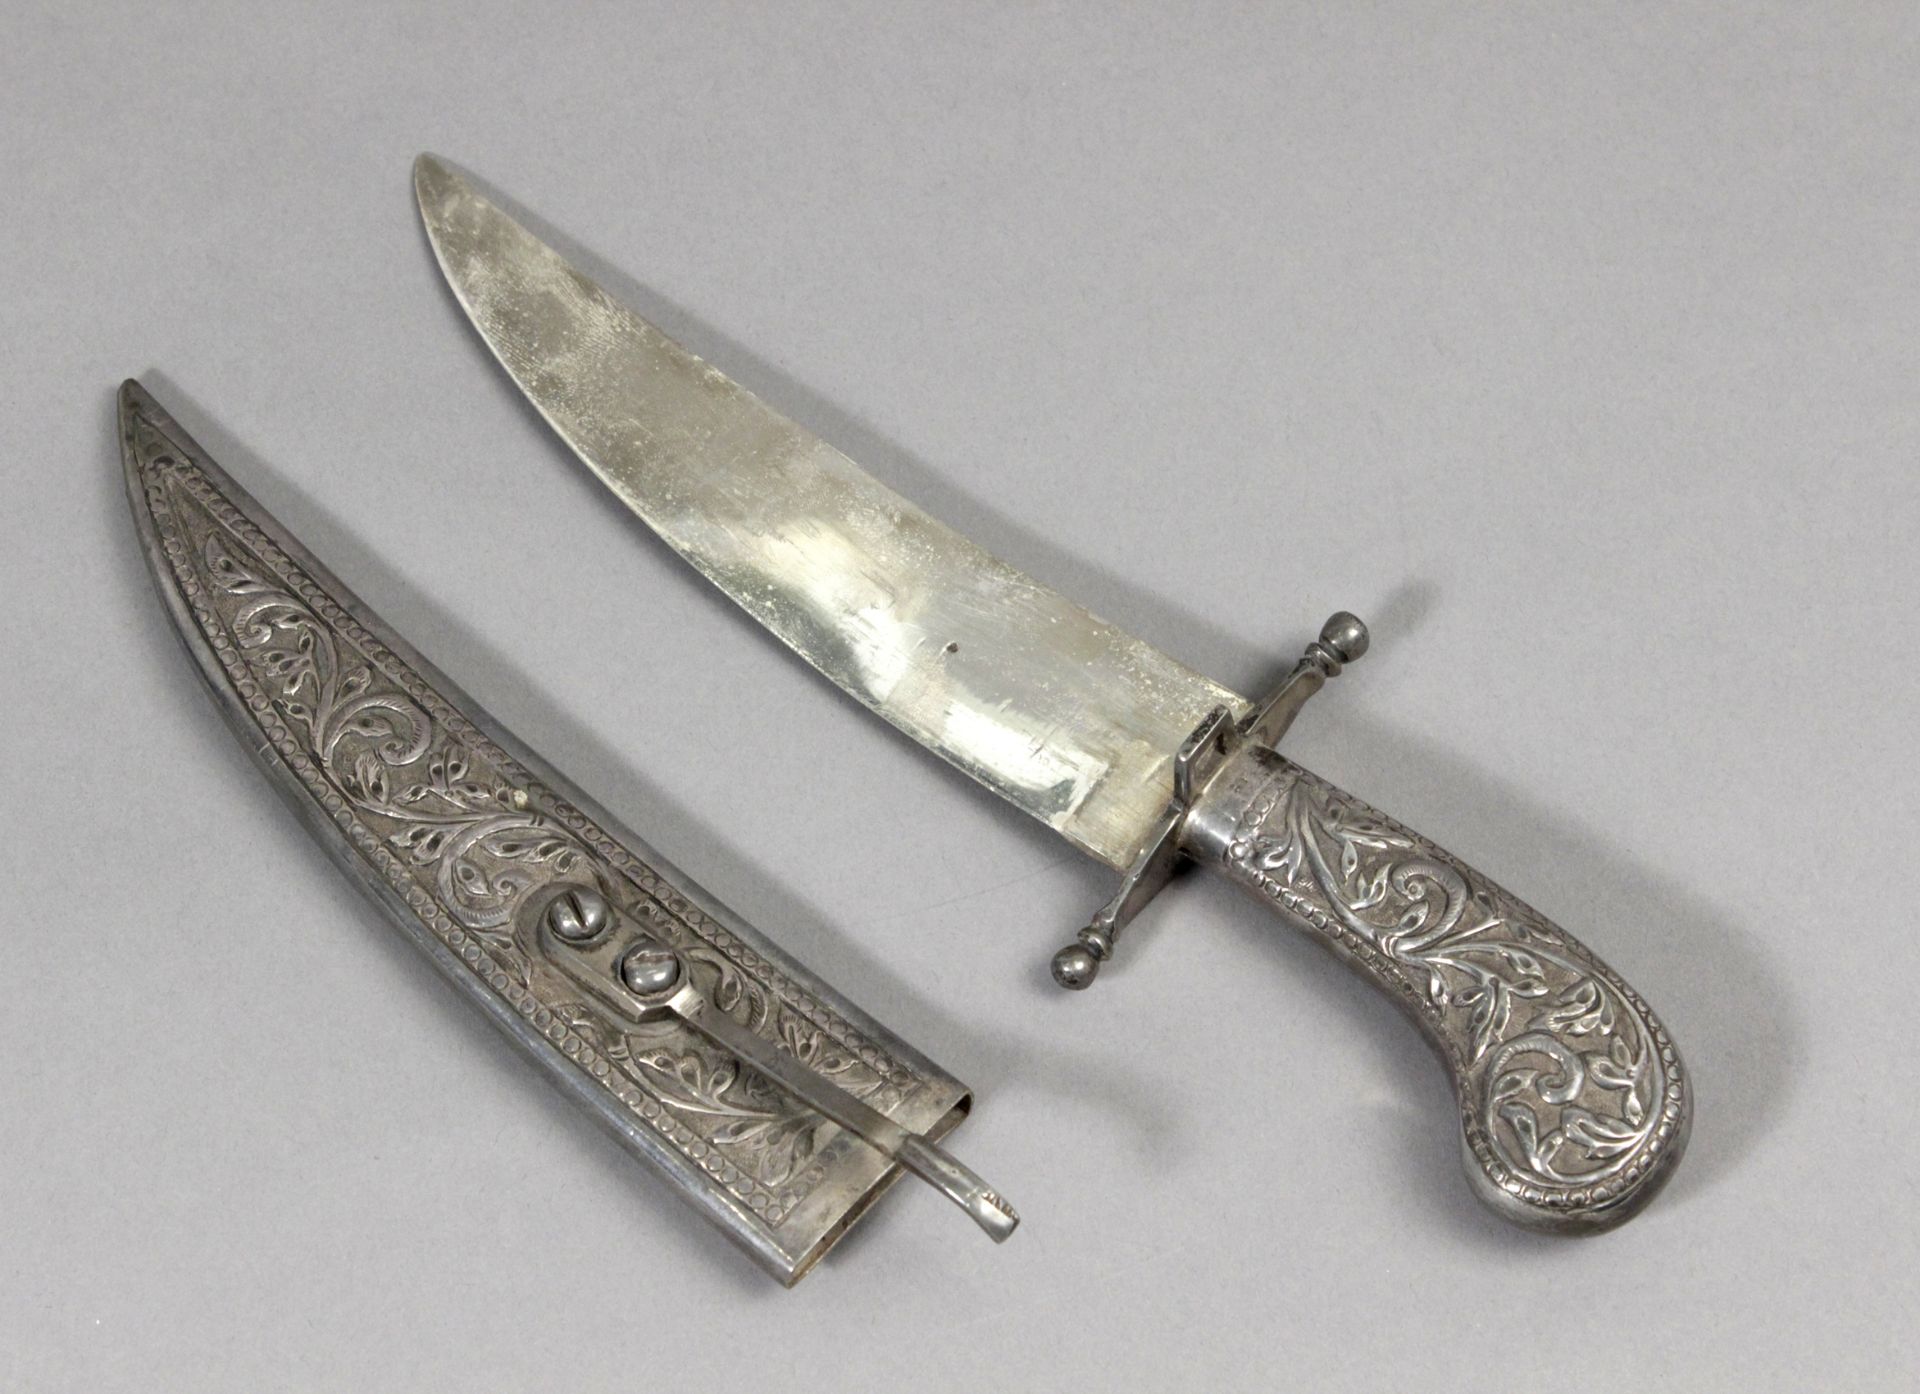 A first half of 20th century silver knife possibly from India - Image 2 of 4